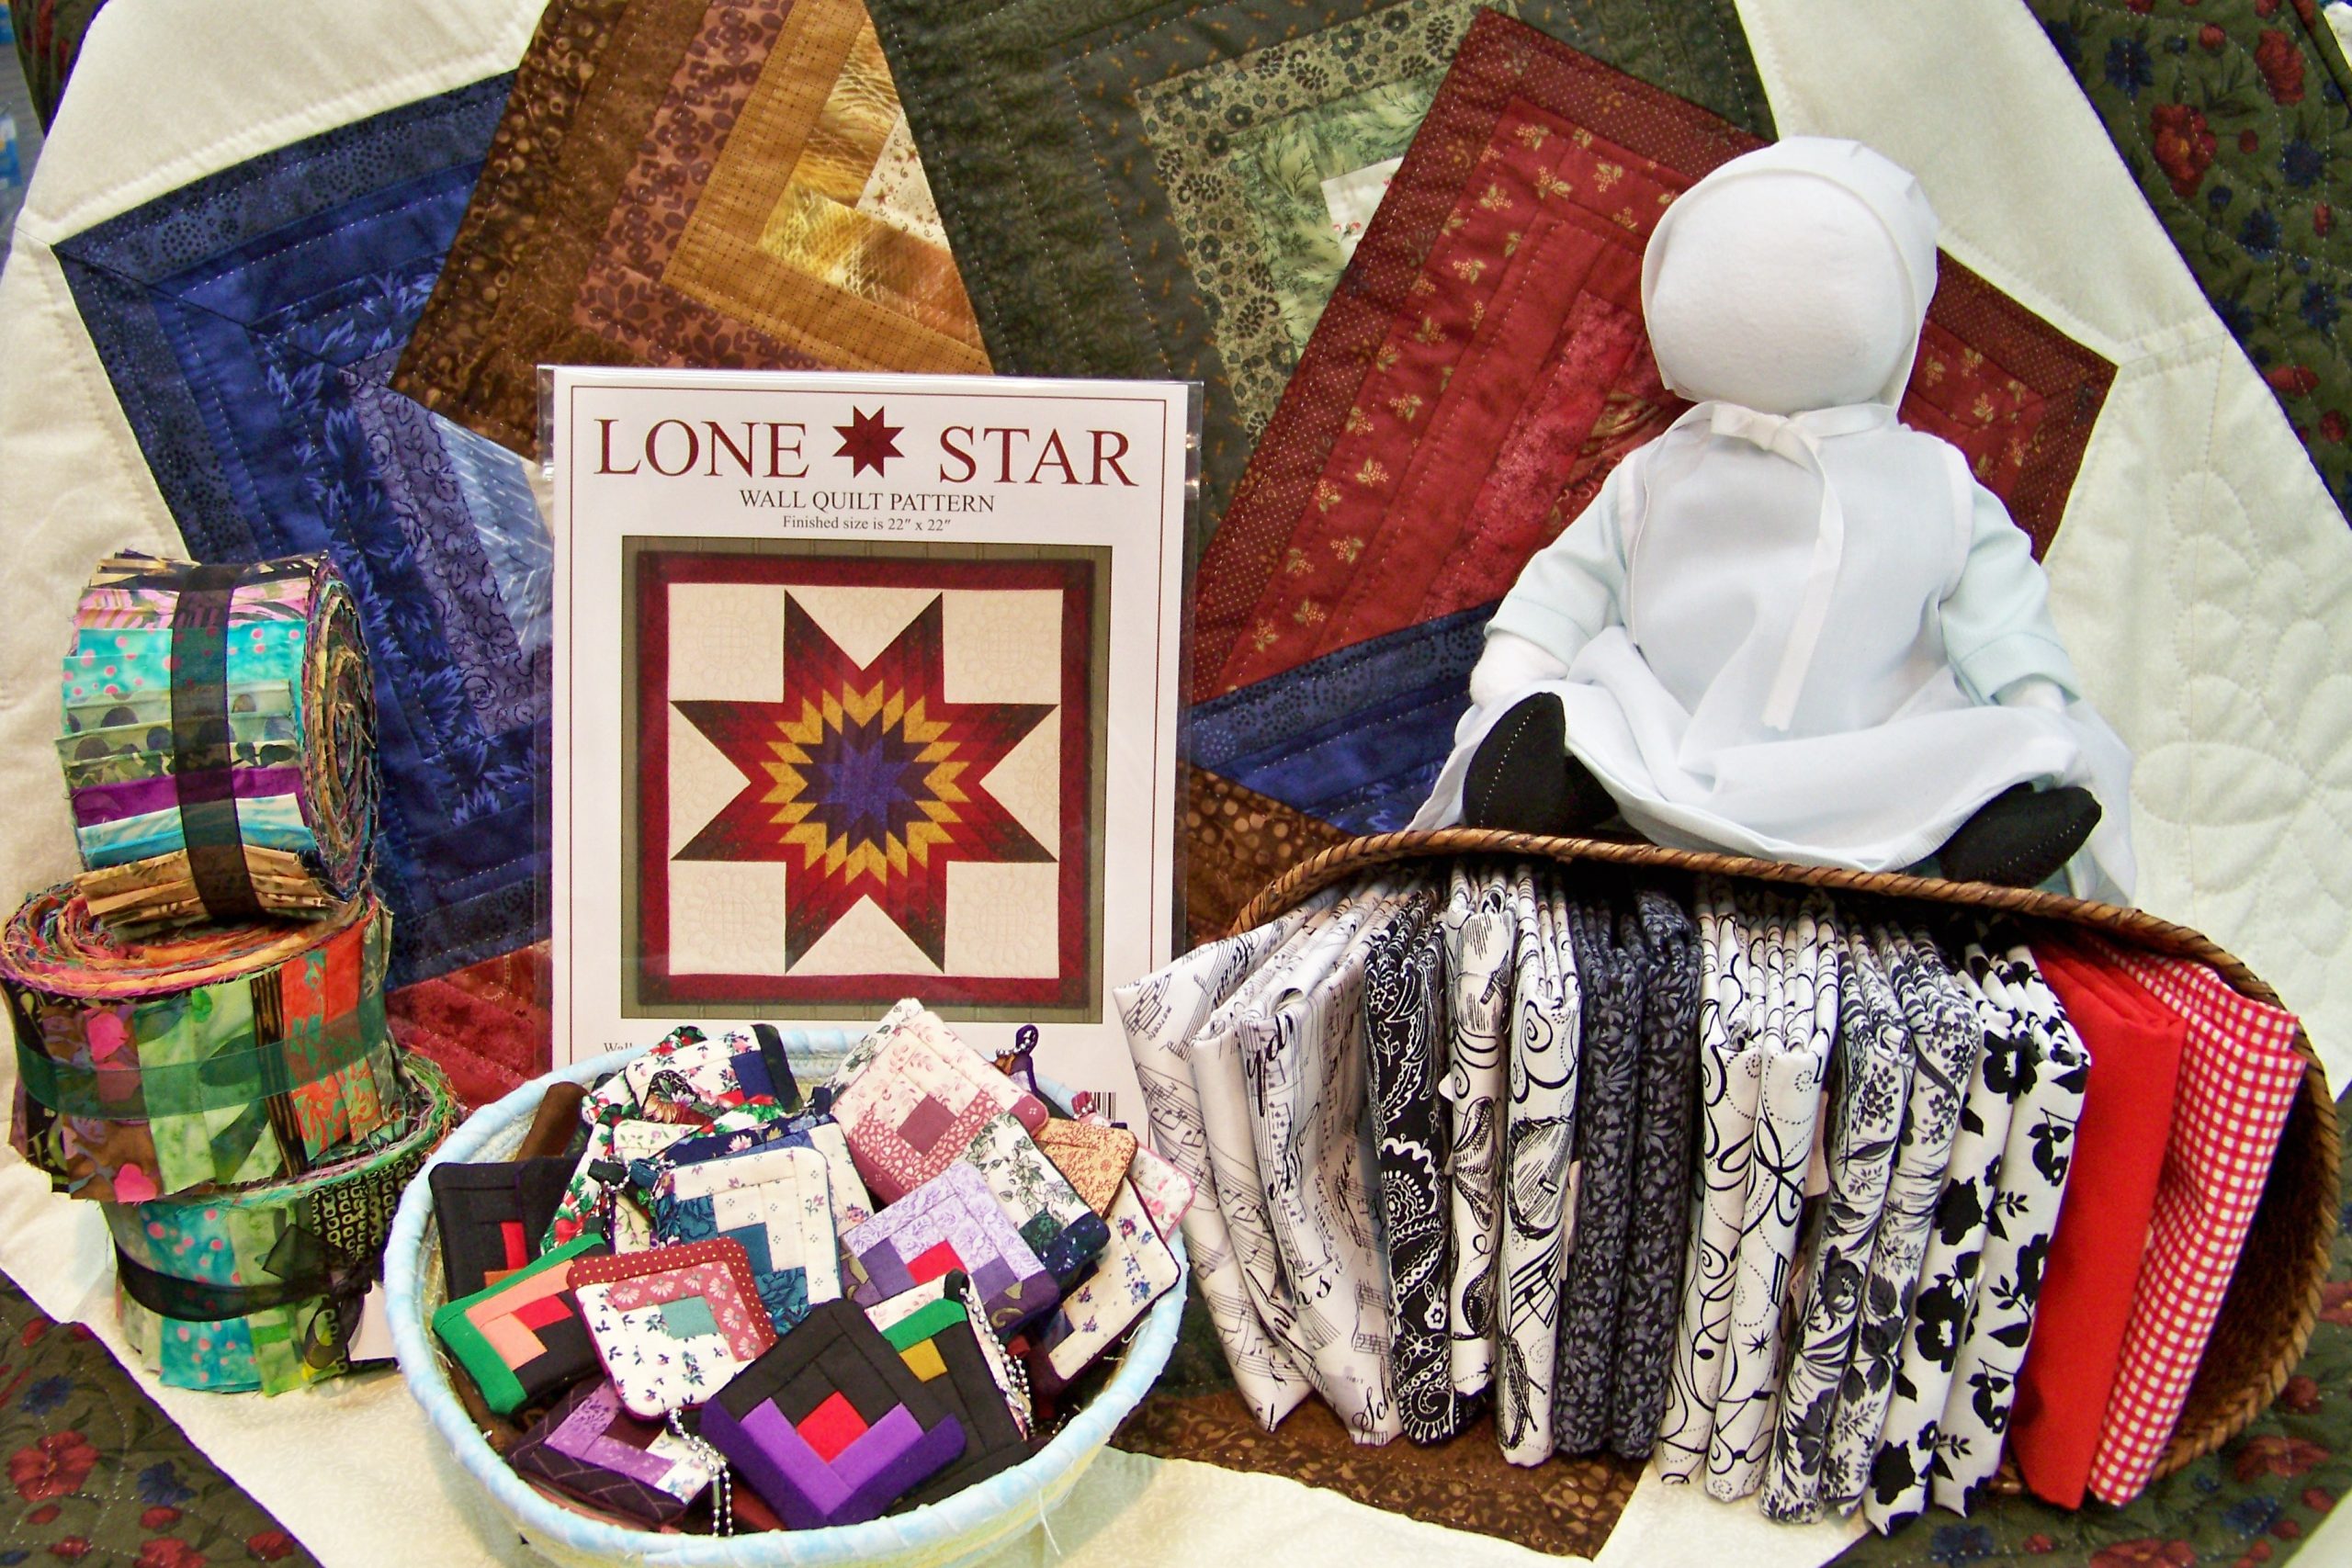 Lone Star Wall Quilt Pattern book and quilts